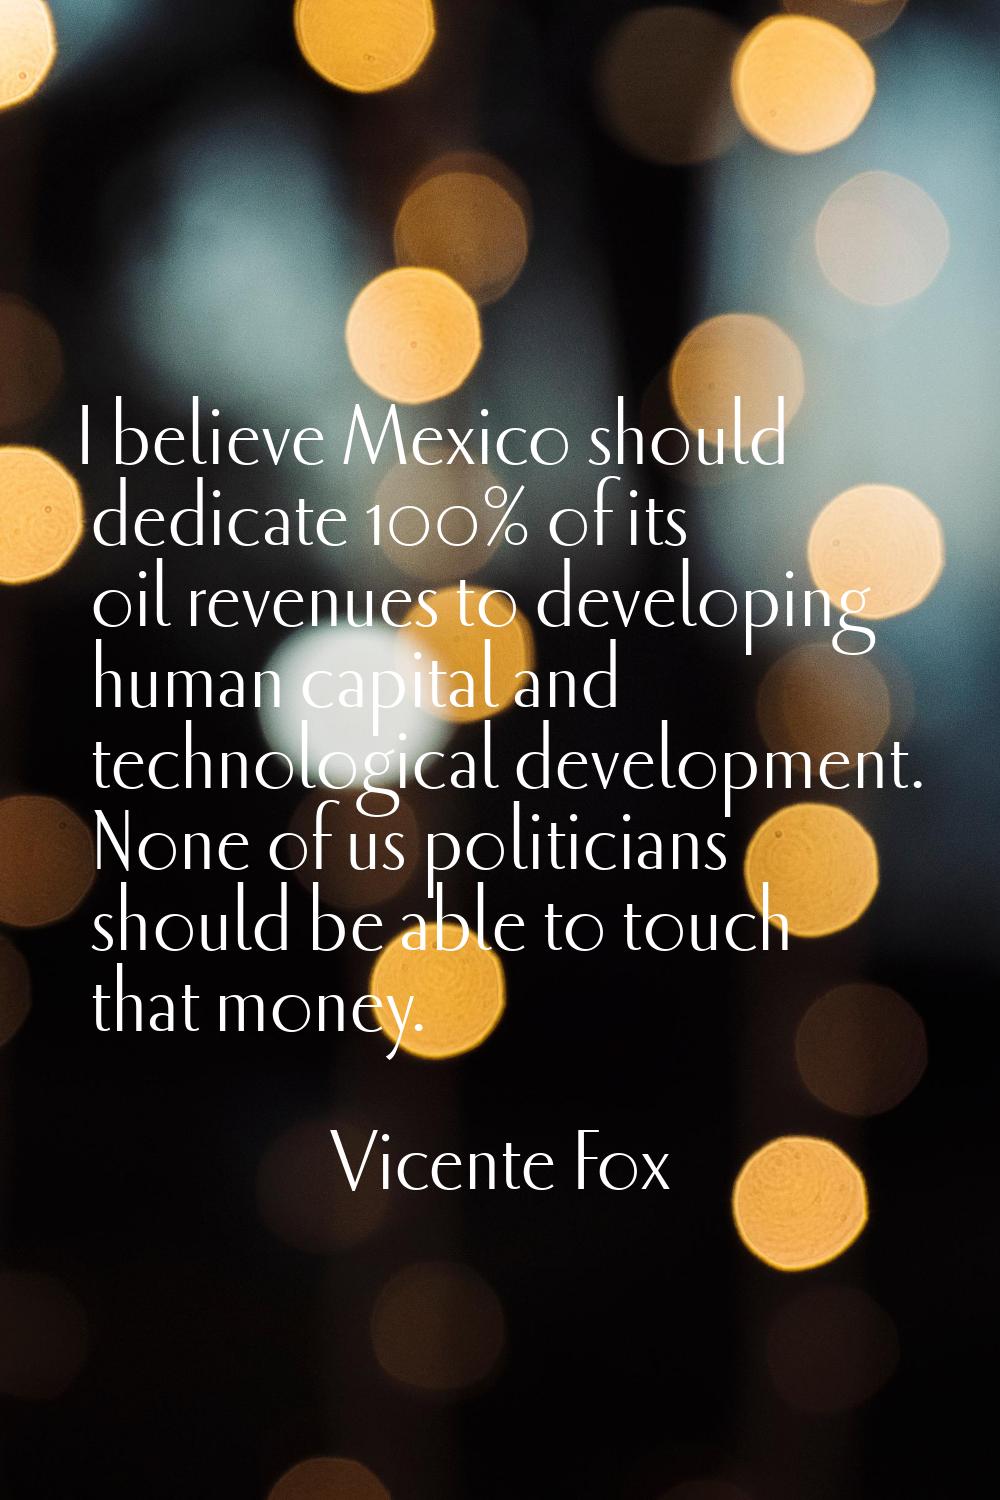 I believe Mexico should dedicate 100% of its oil revenues to developing human capital and technolog